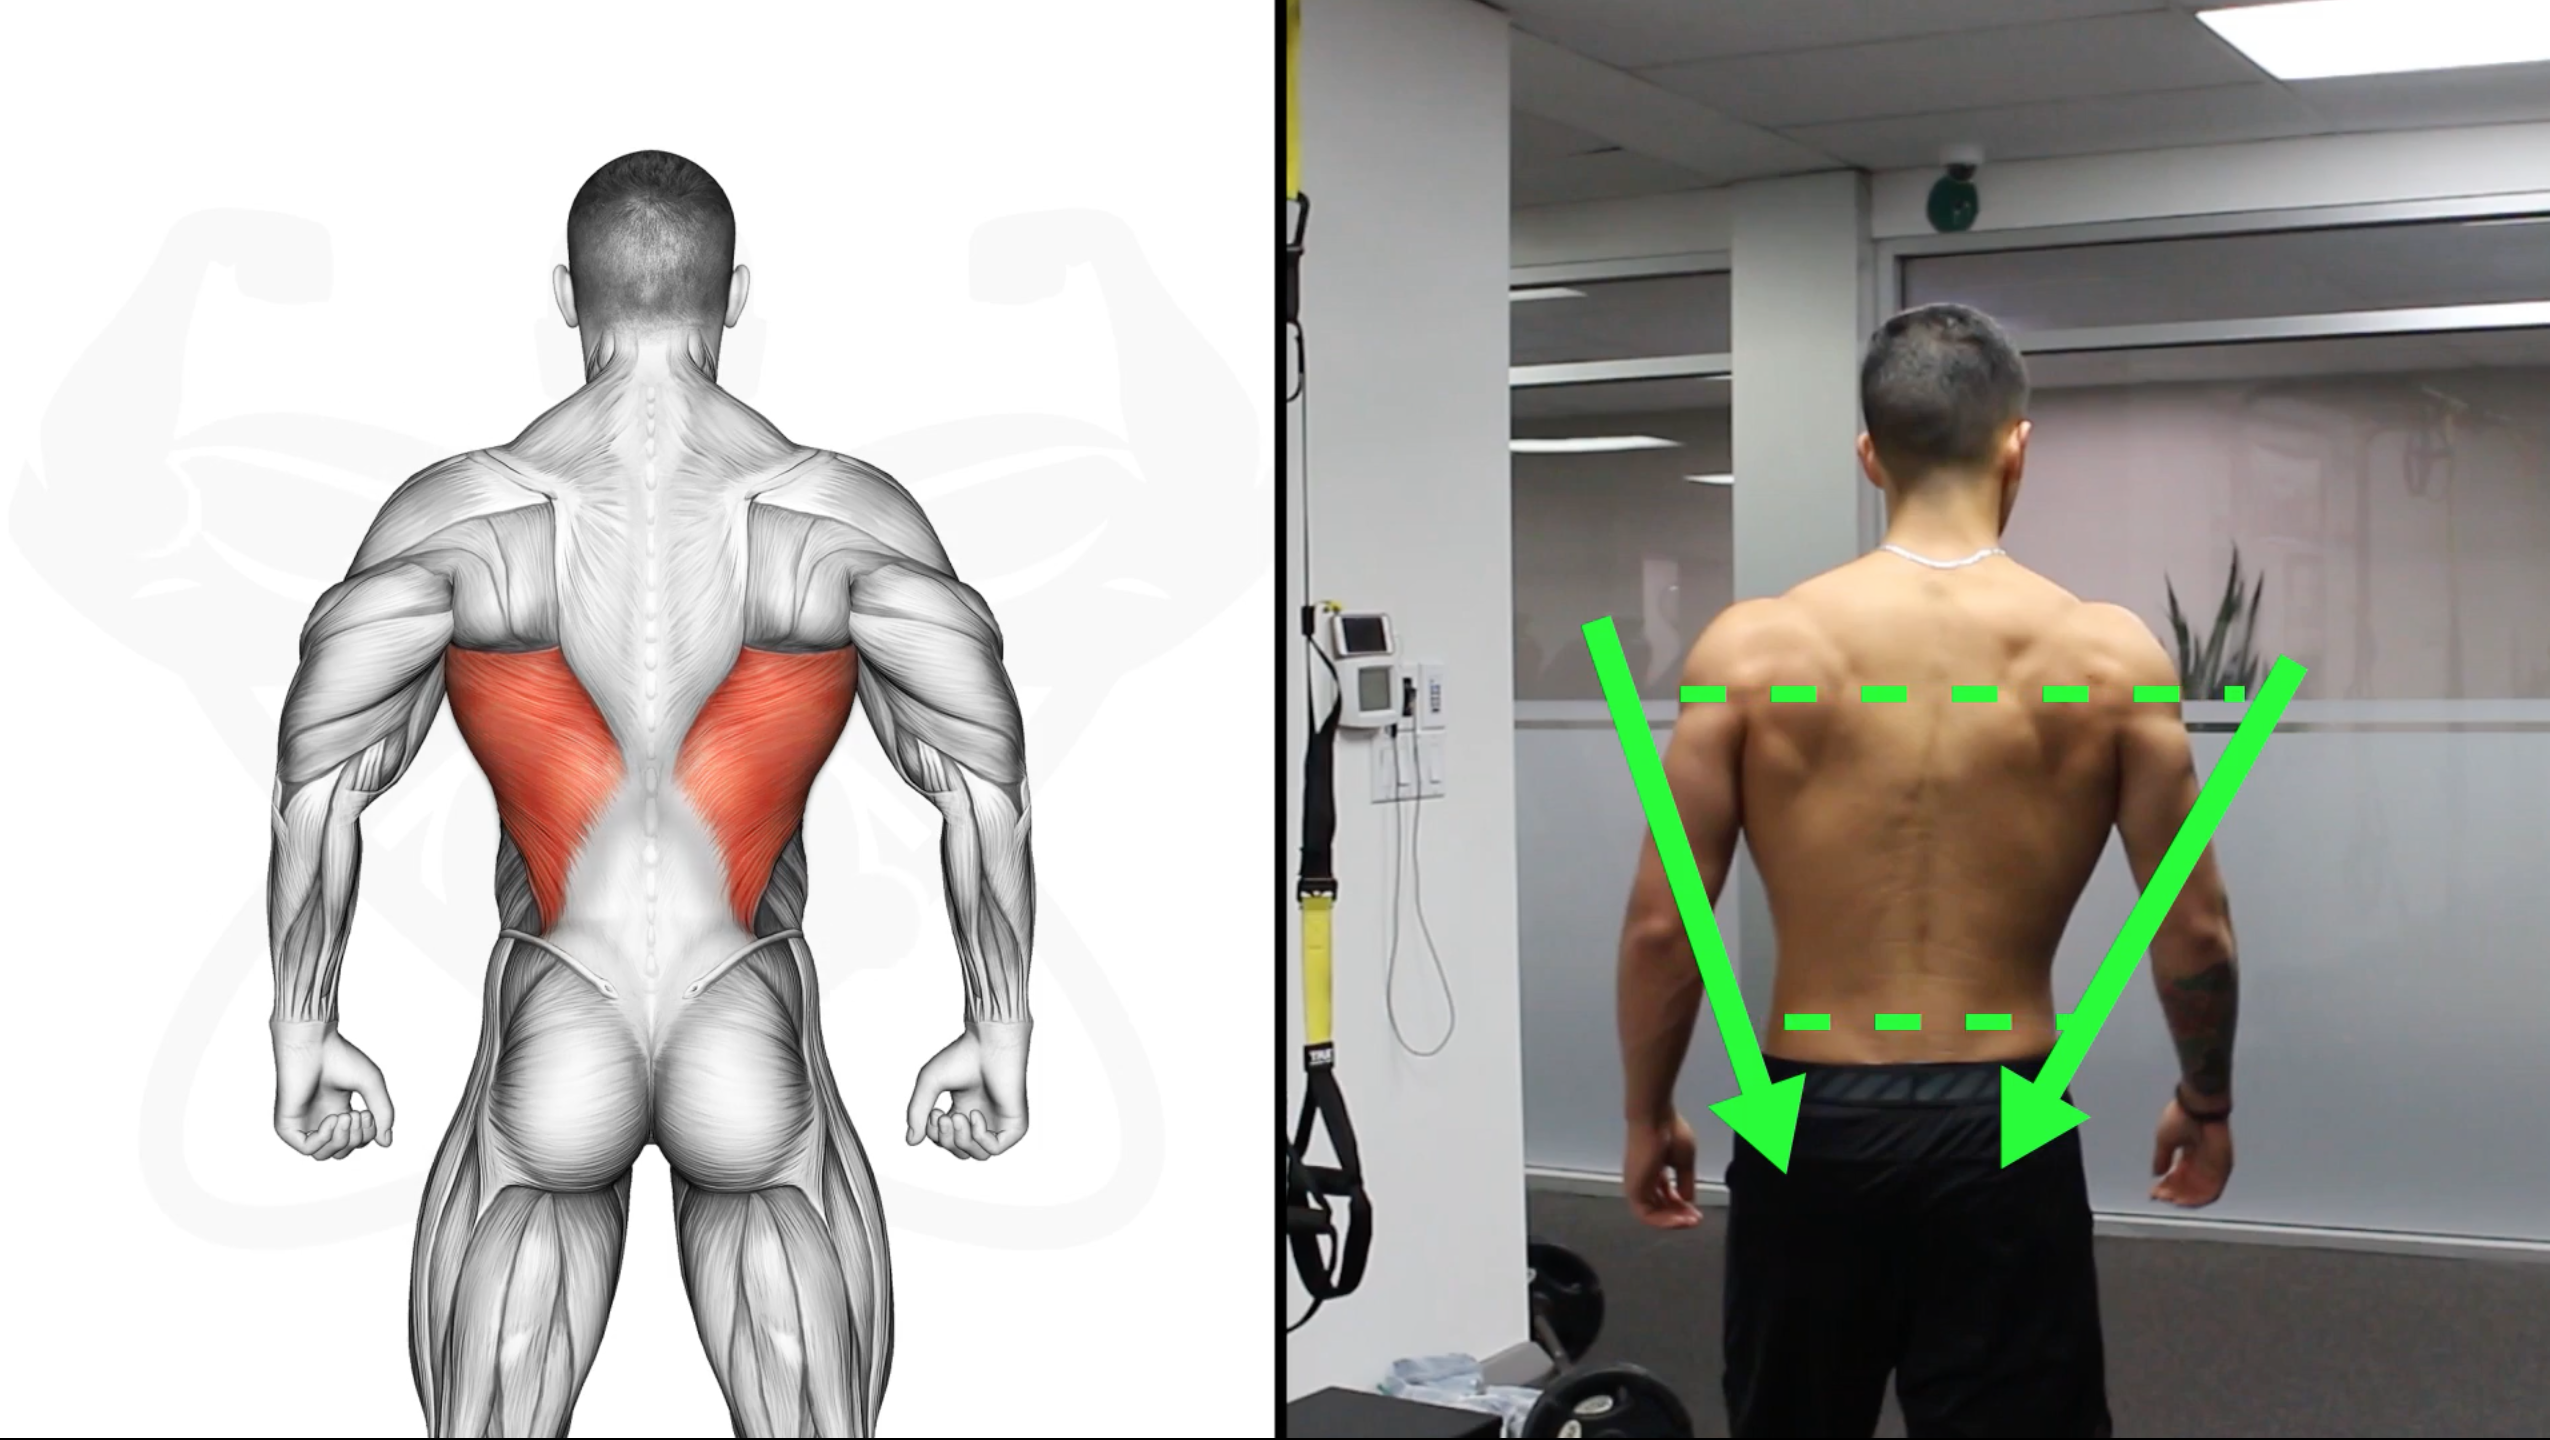 How To Get A Wider Back Fast (4 Science-Based Tips)